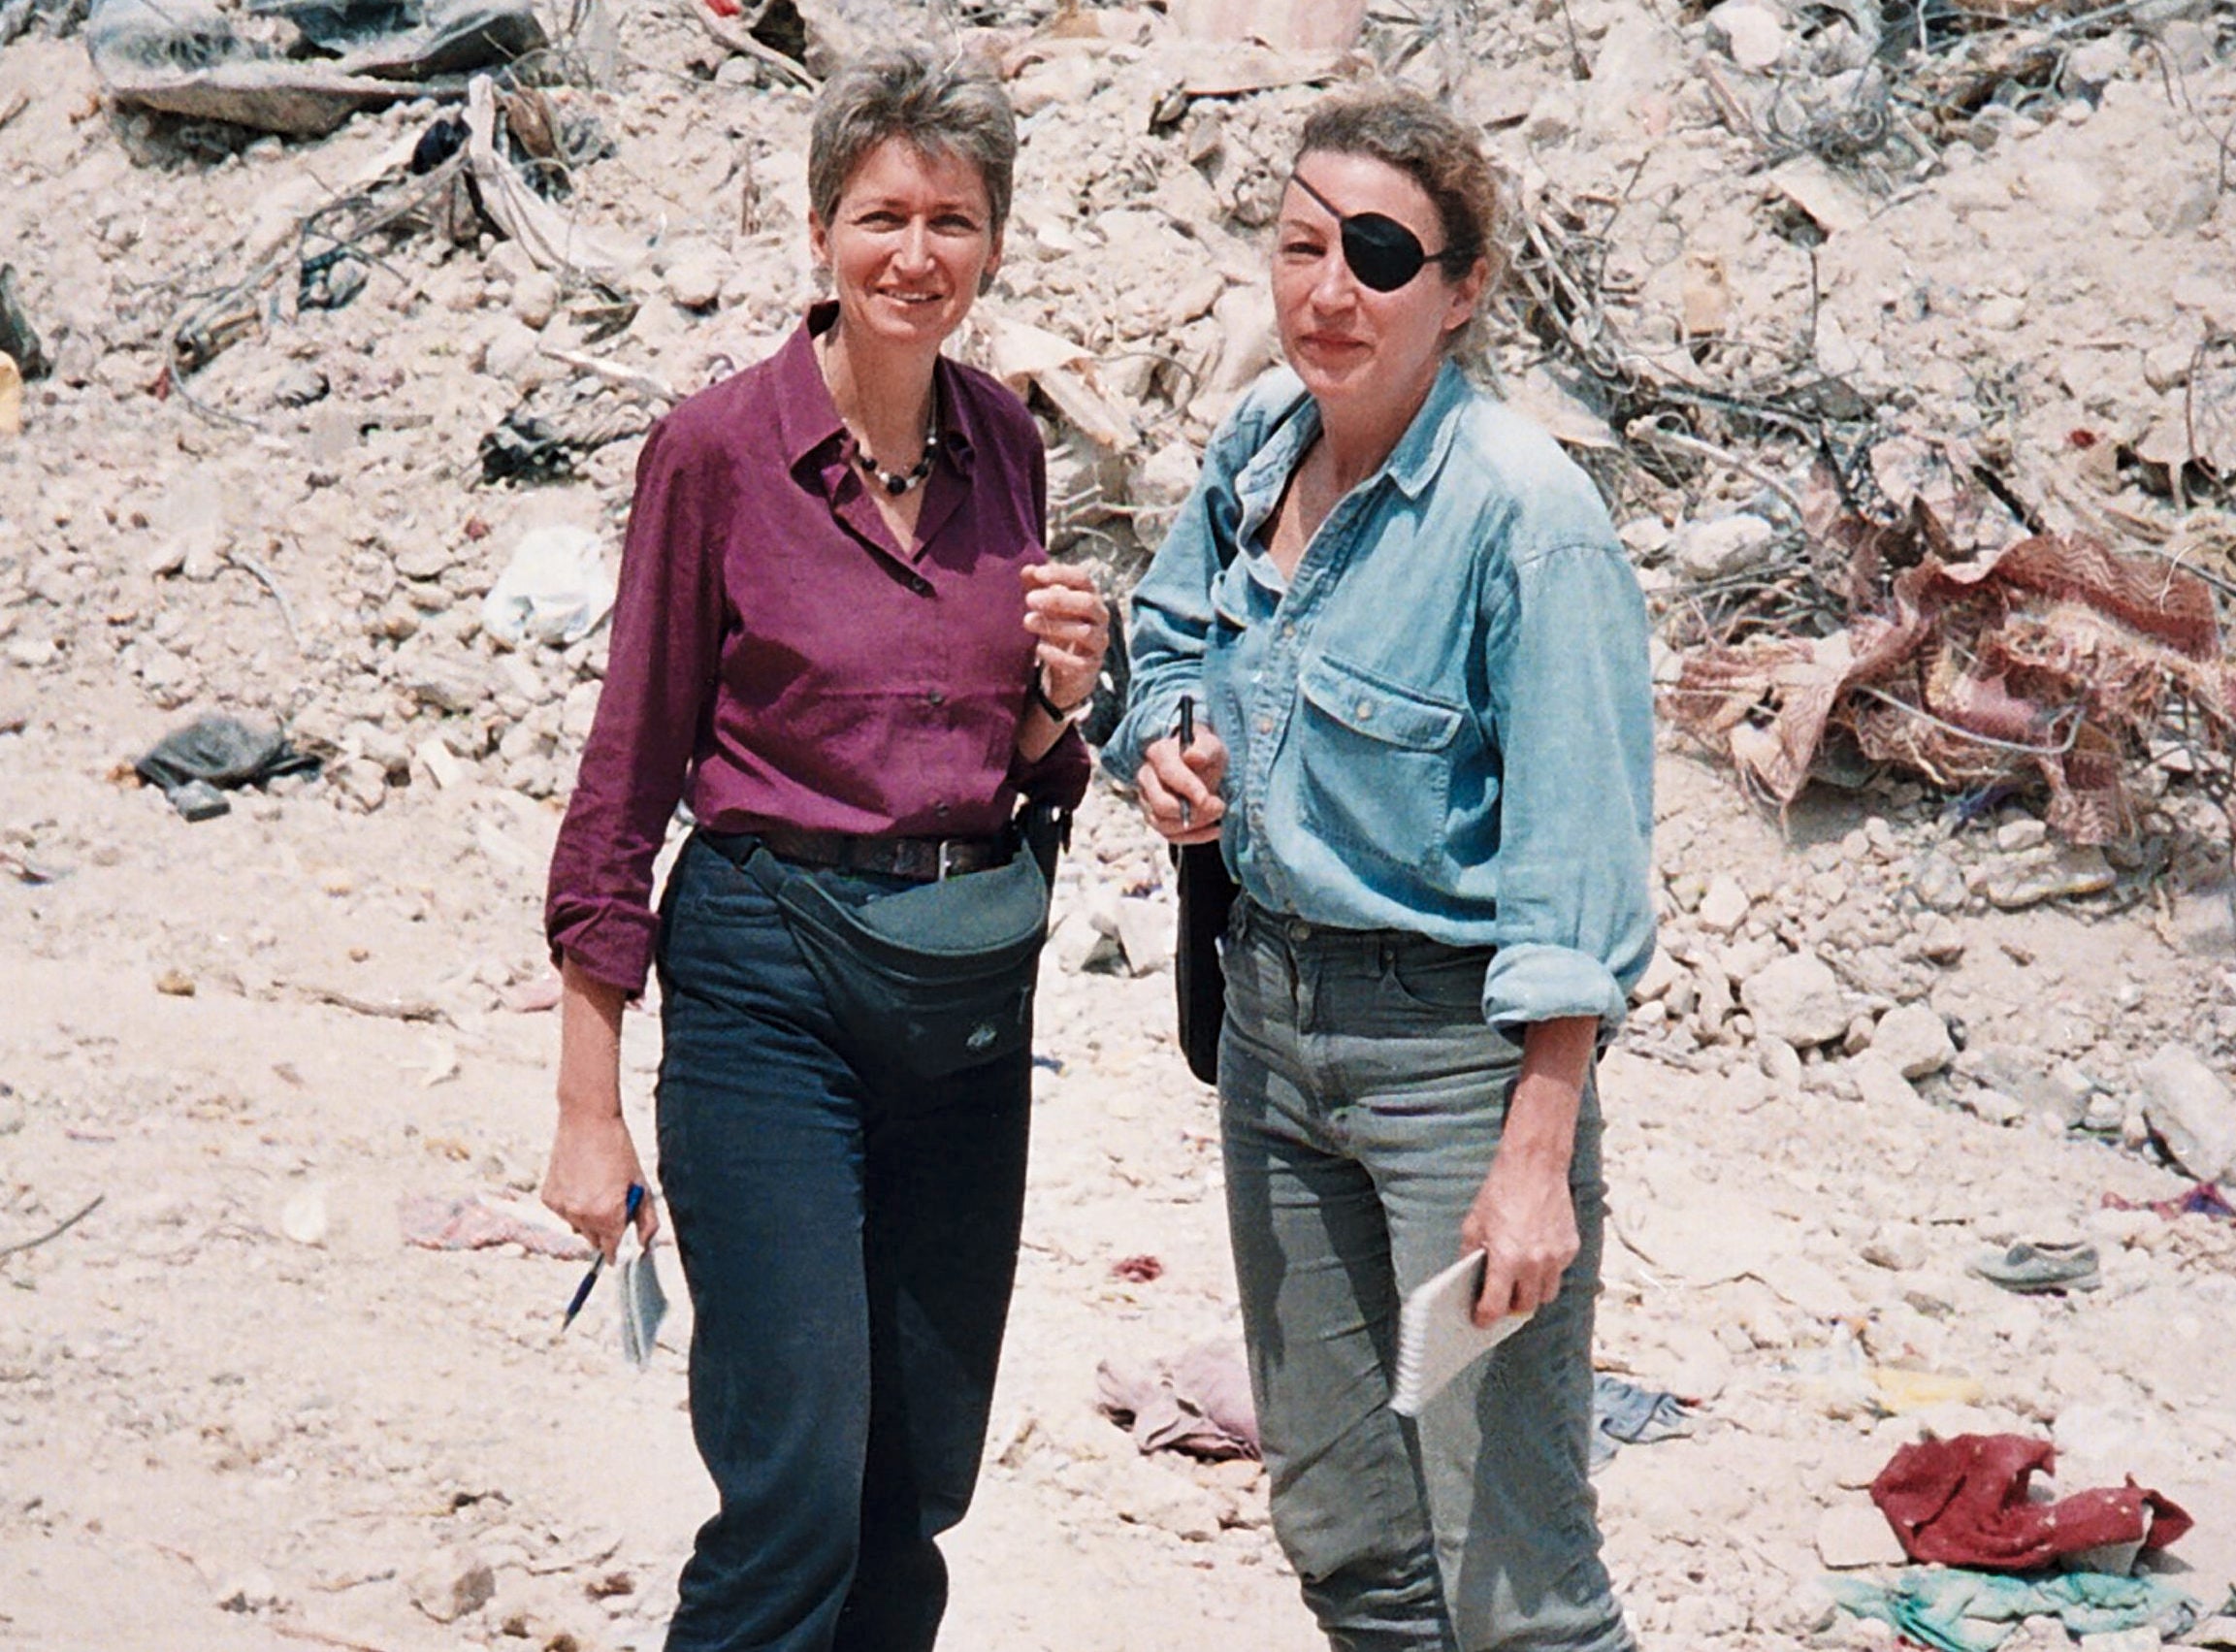 Lindsey Hilsum 'anxious' of adding to 'myth' of killed Sunday Times war reporter Marie Colvin through new book on her life